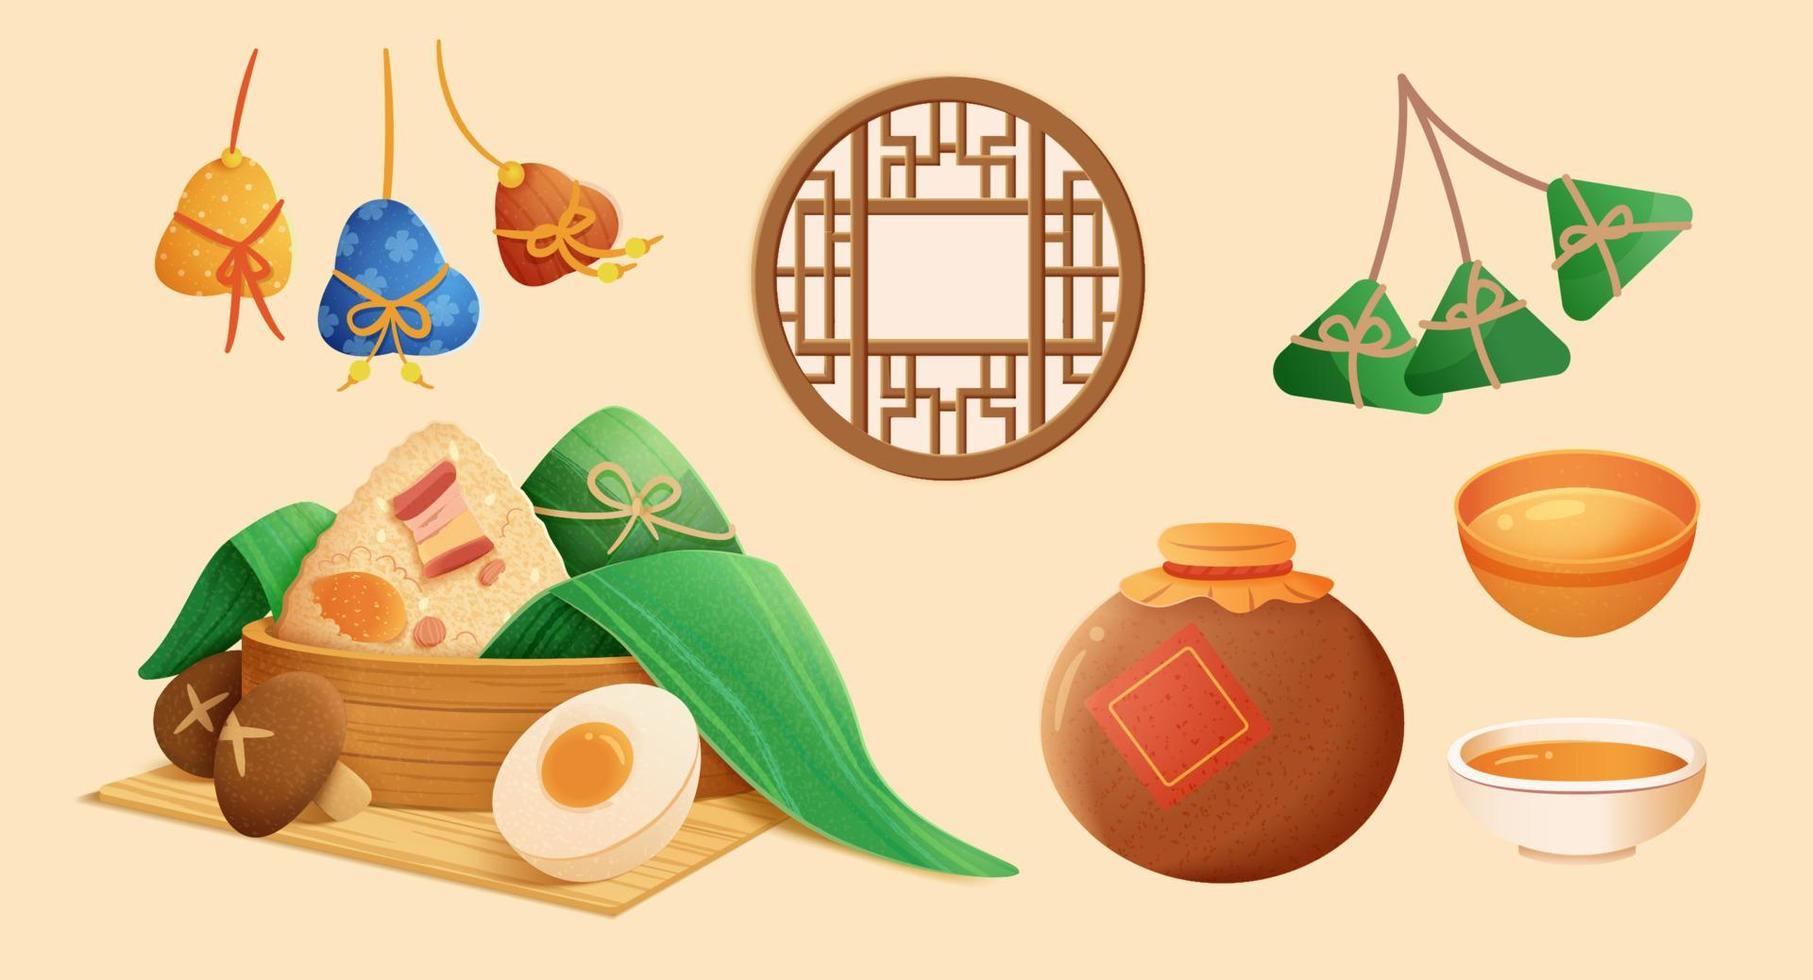 Cute illustrated Dragon Boat Festival food element set, isolated on beige background. vector